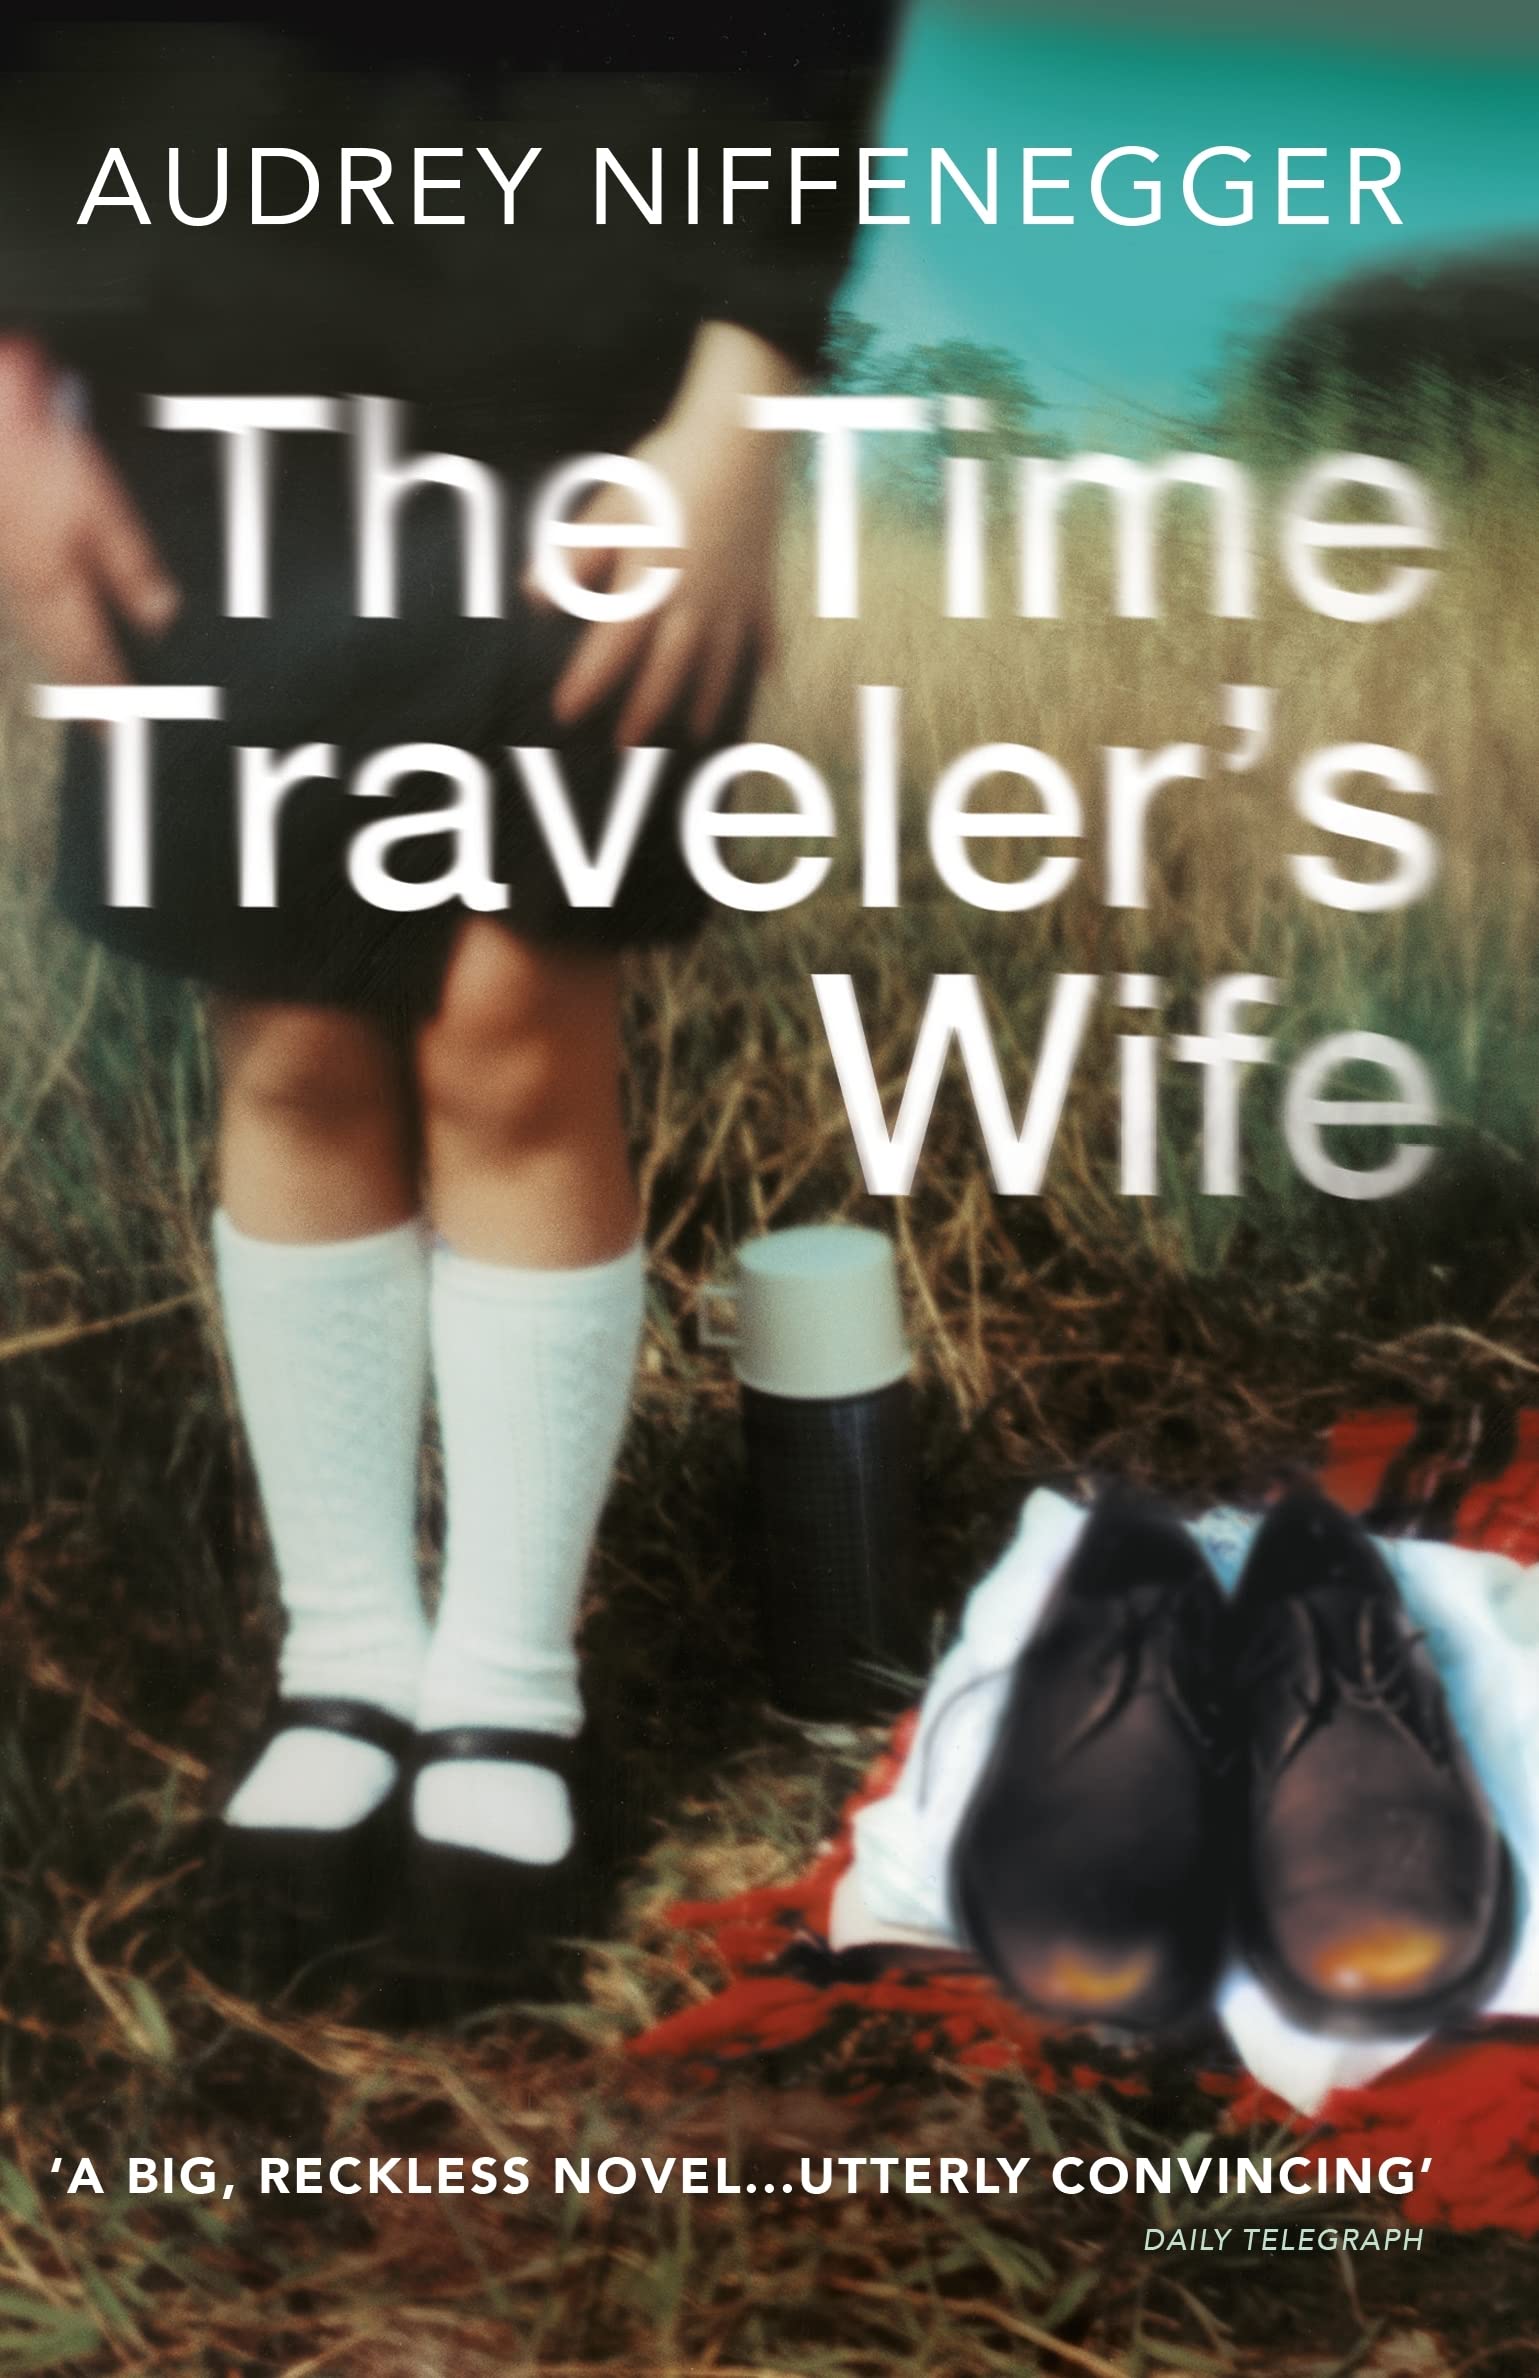 Audrey Niffenegger, William Hope, Audrey Niffenegger, Laurel Lefkow: The Time Traveler's Wife (2013)